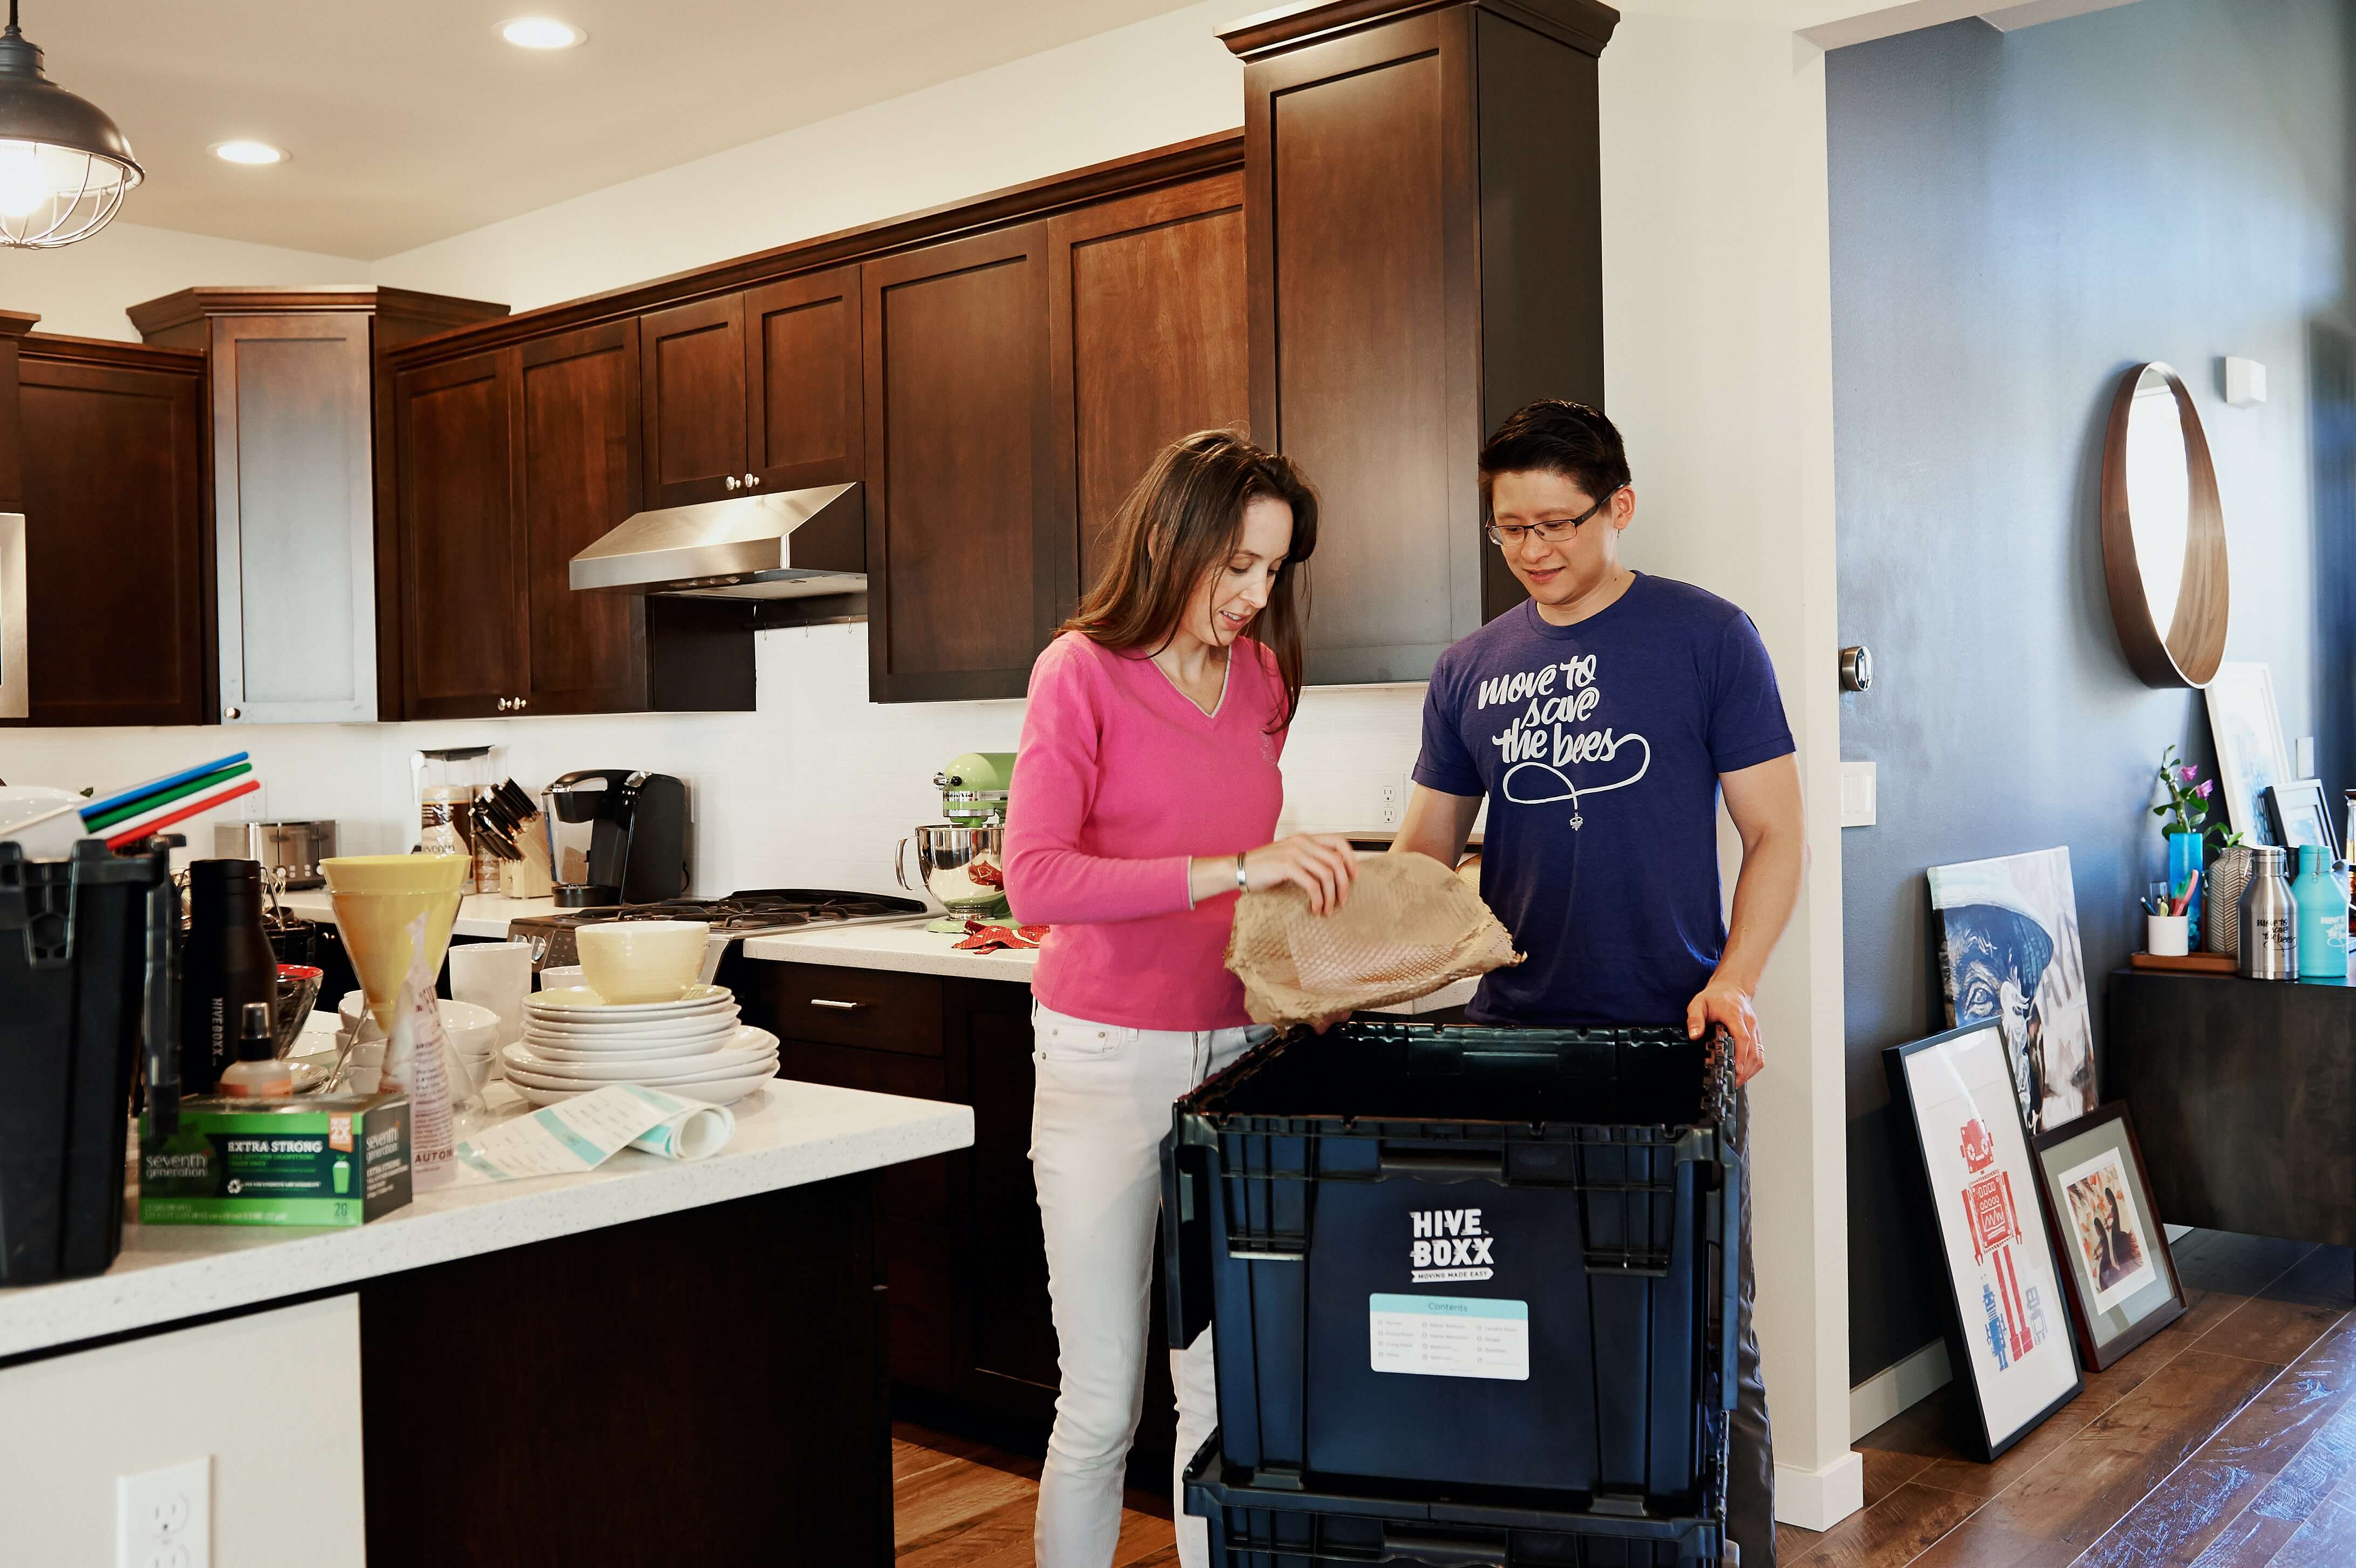 A man and woman packing their belongings in the kitchen